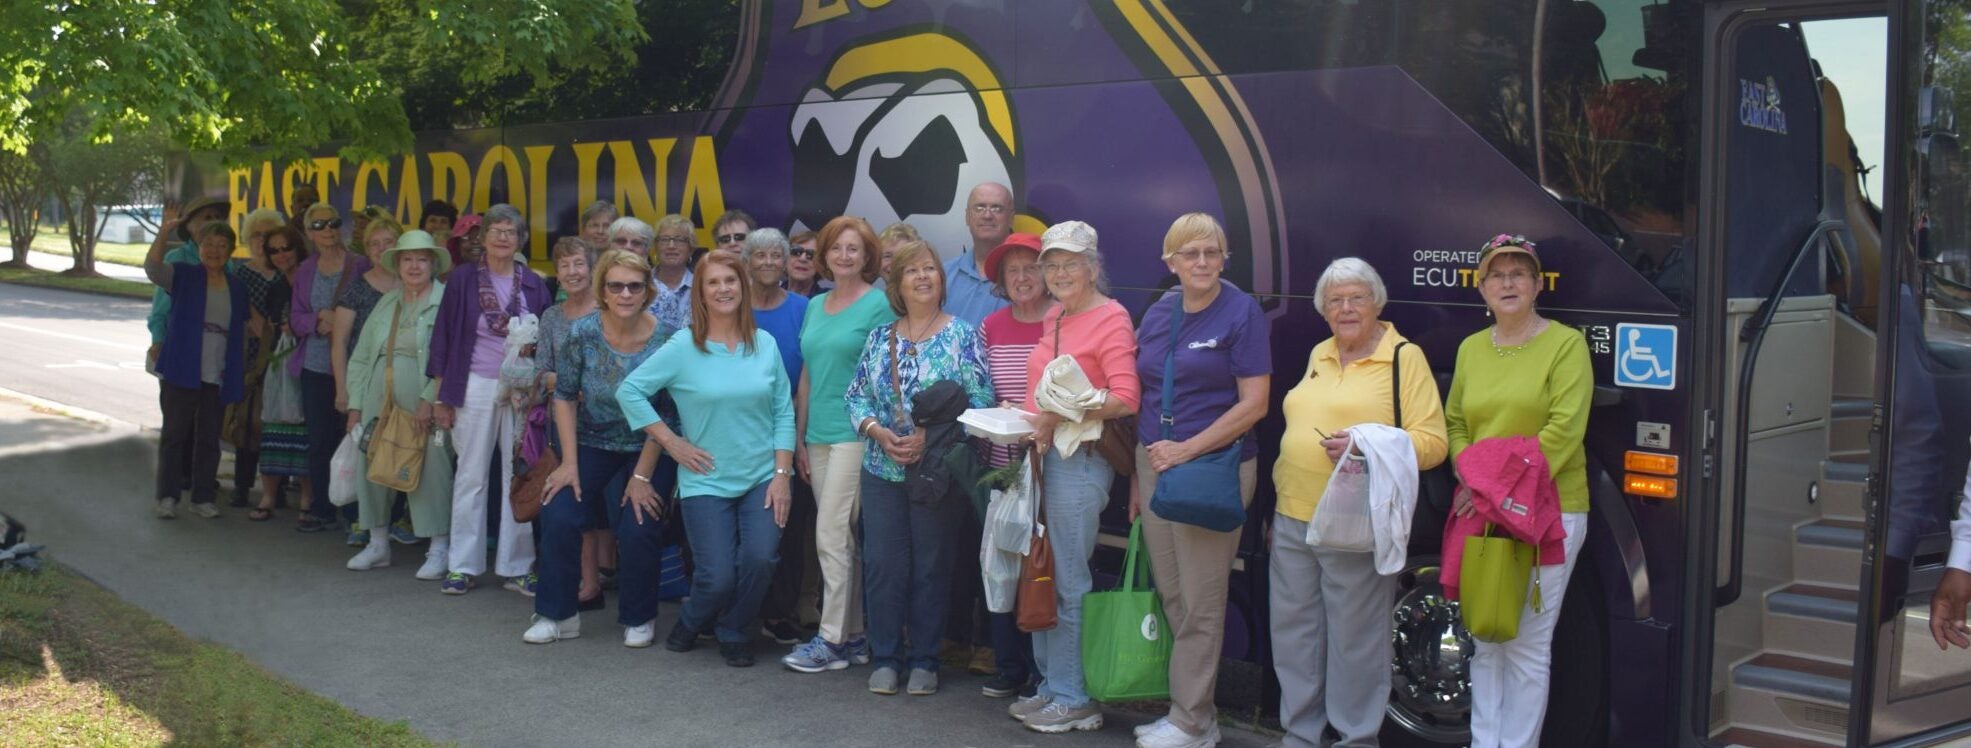 Group of Lifelong Learning Program participants in front of an ECU bus on a trip